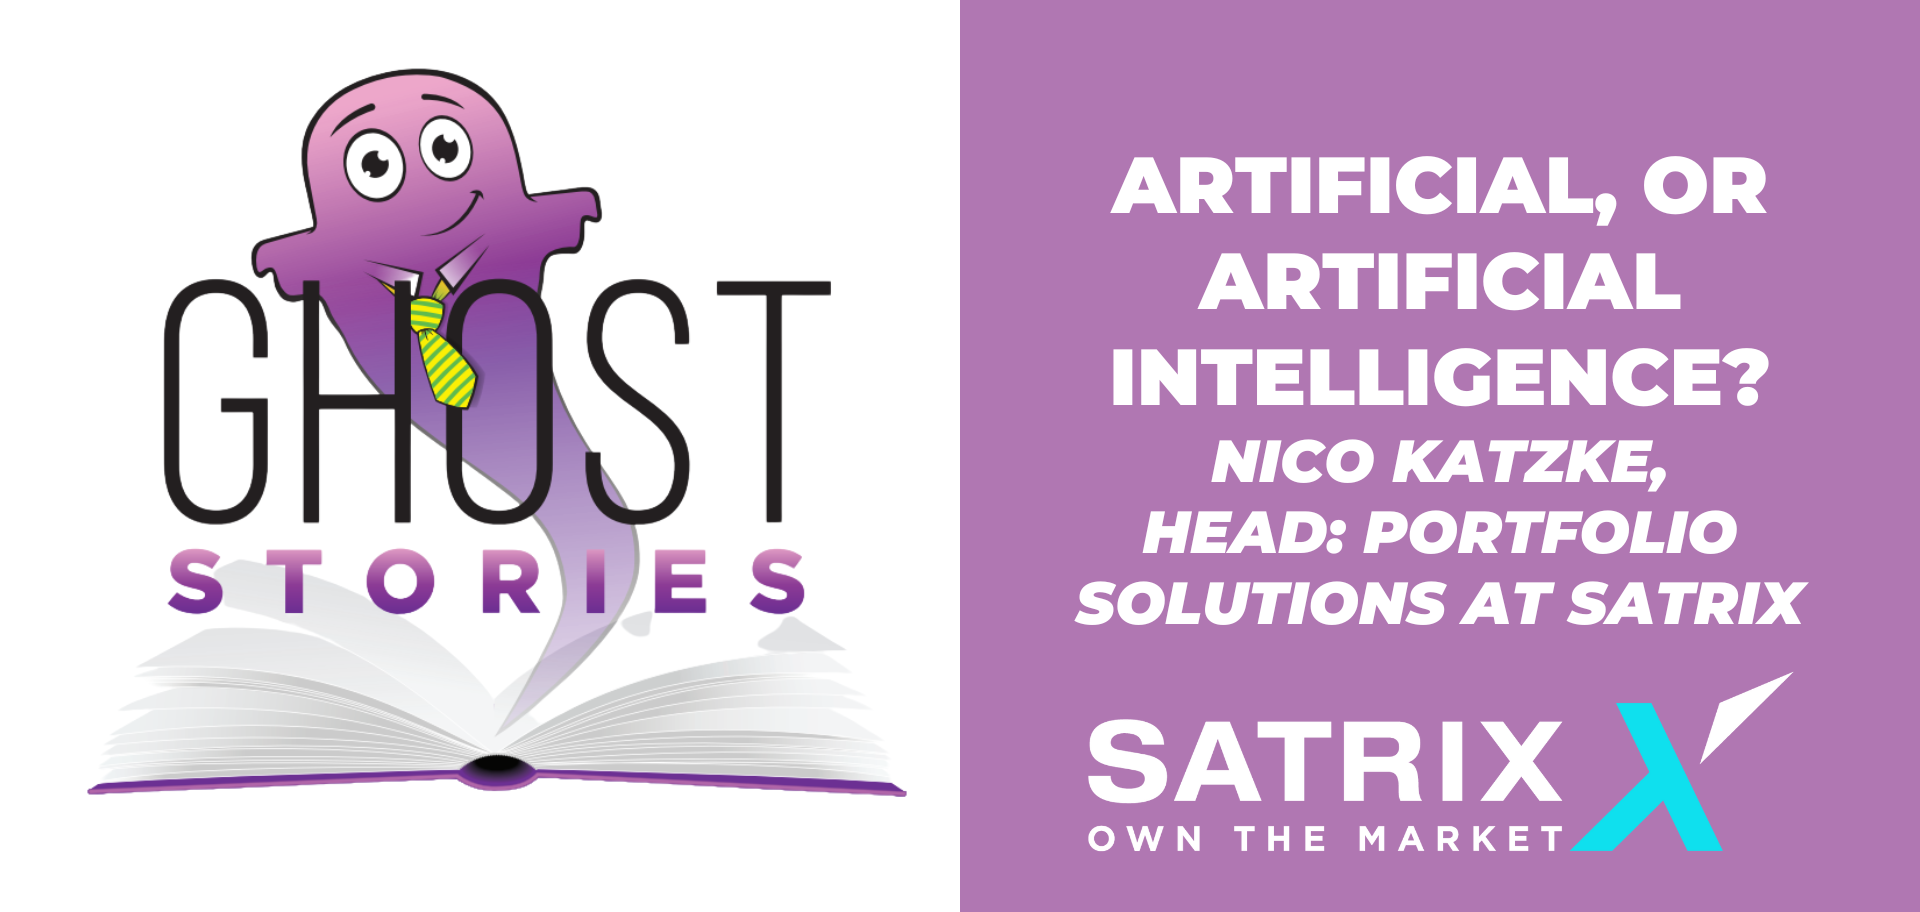 Ghost Stories Ep33: Artificial, or Artificial Intelligence? (with Nico Katzke of Satrix)